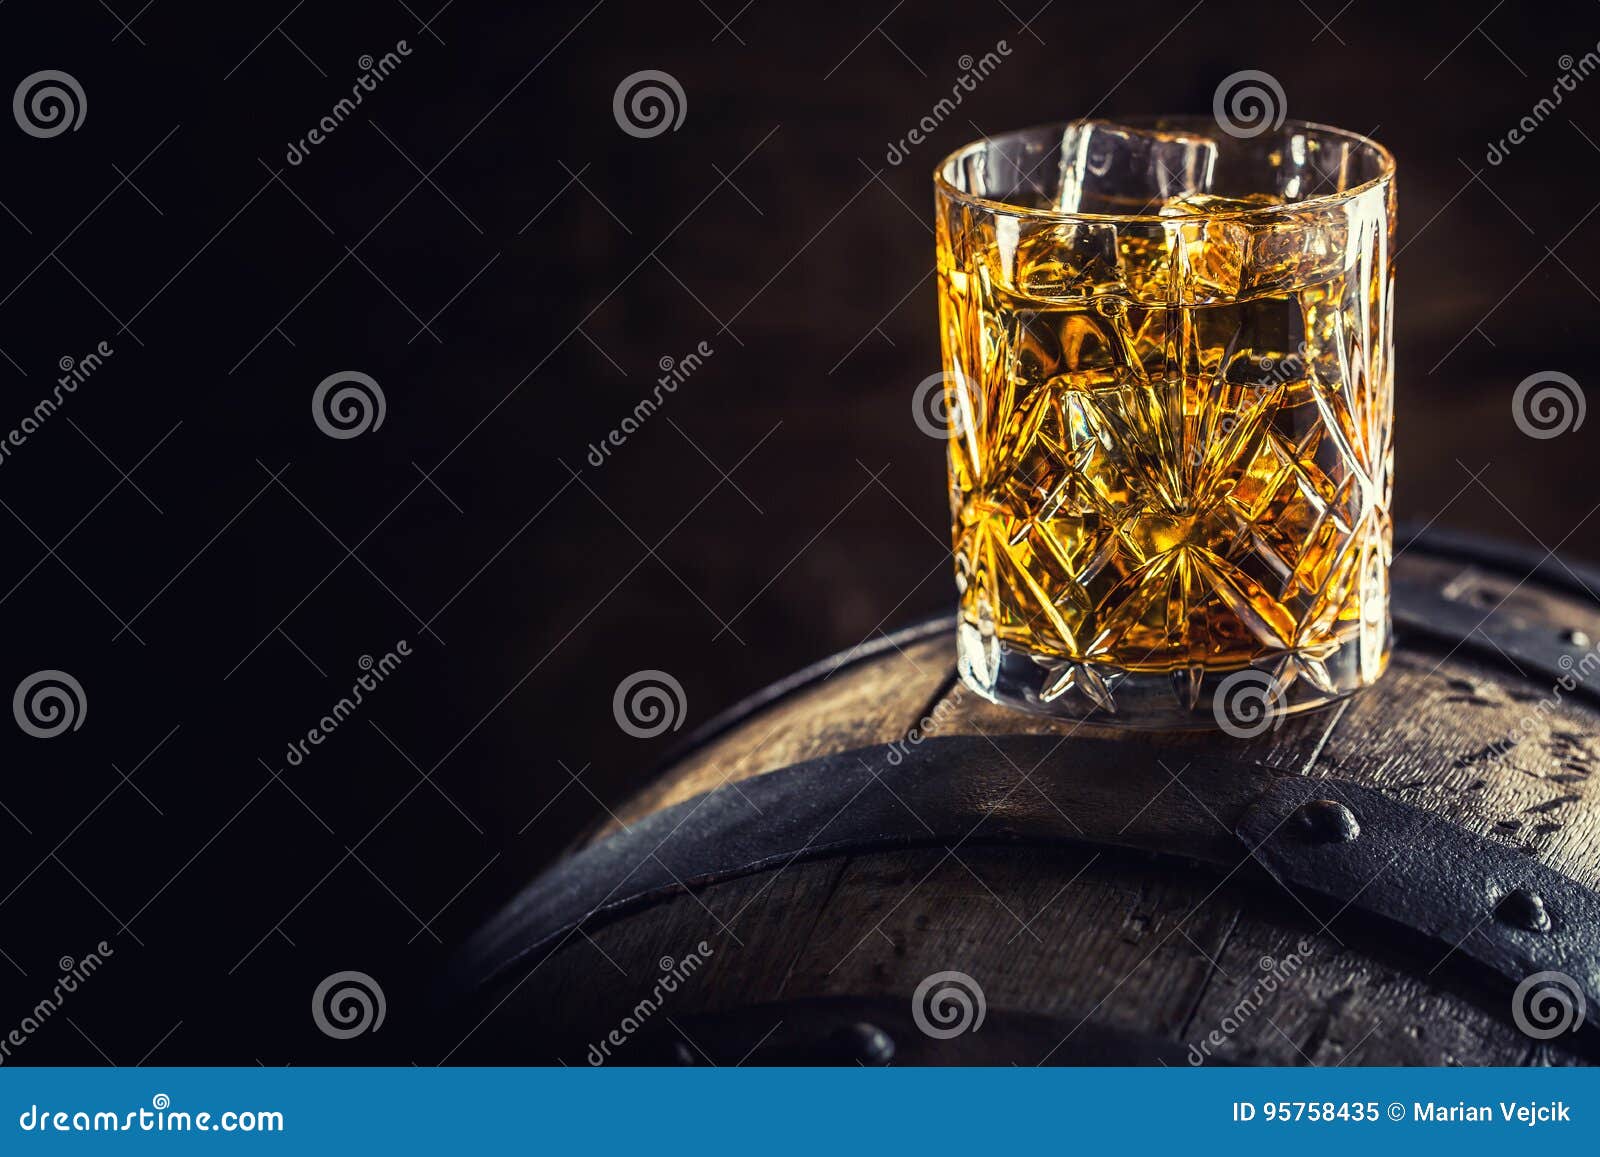 whiskey drink. glass of whiskey on old wooden barrel